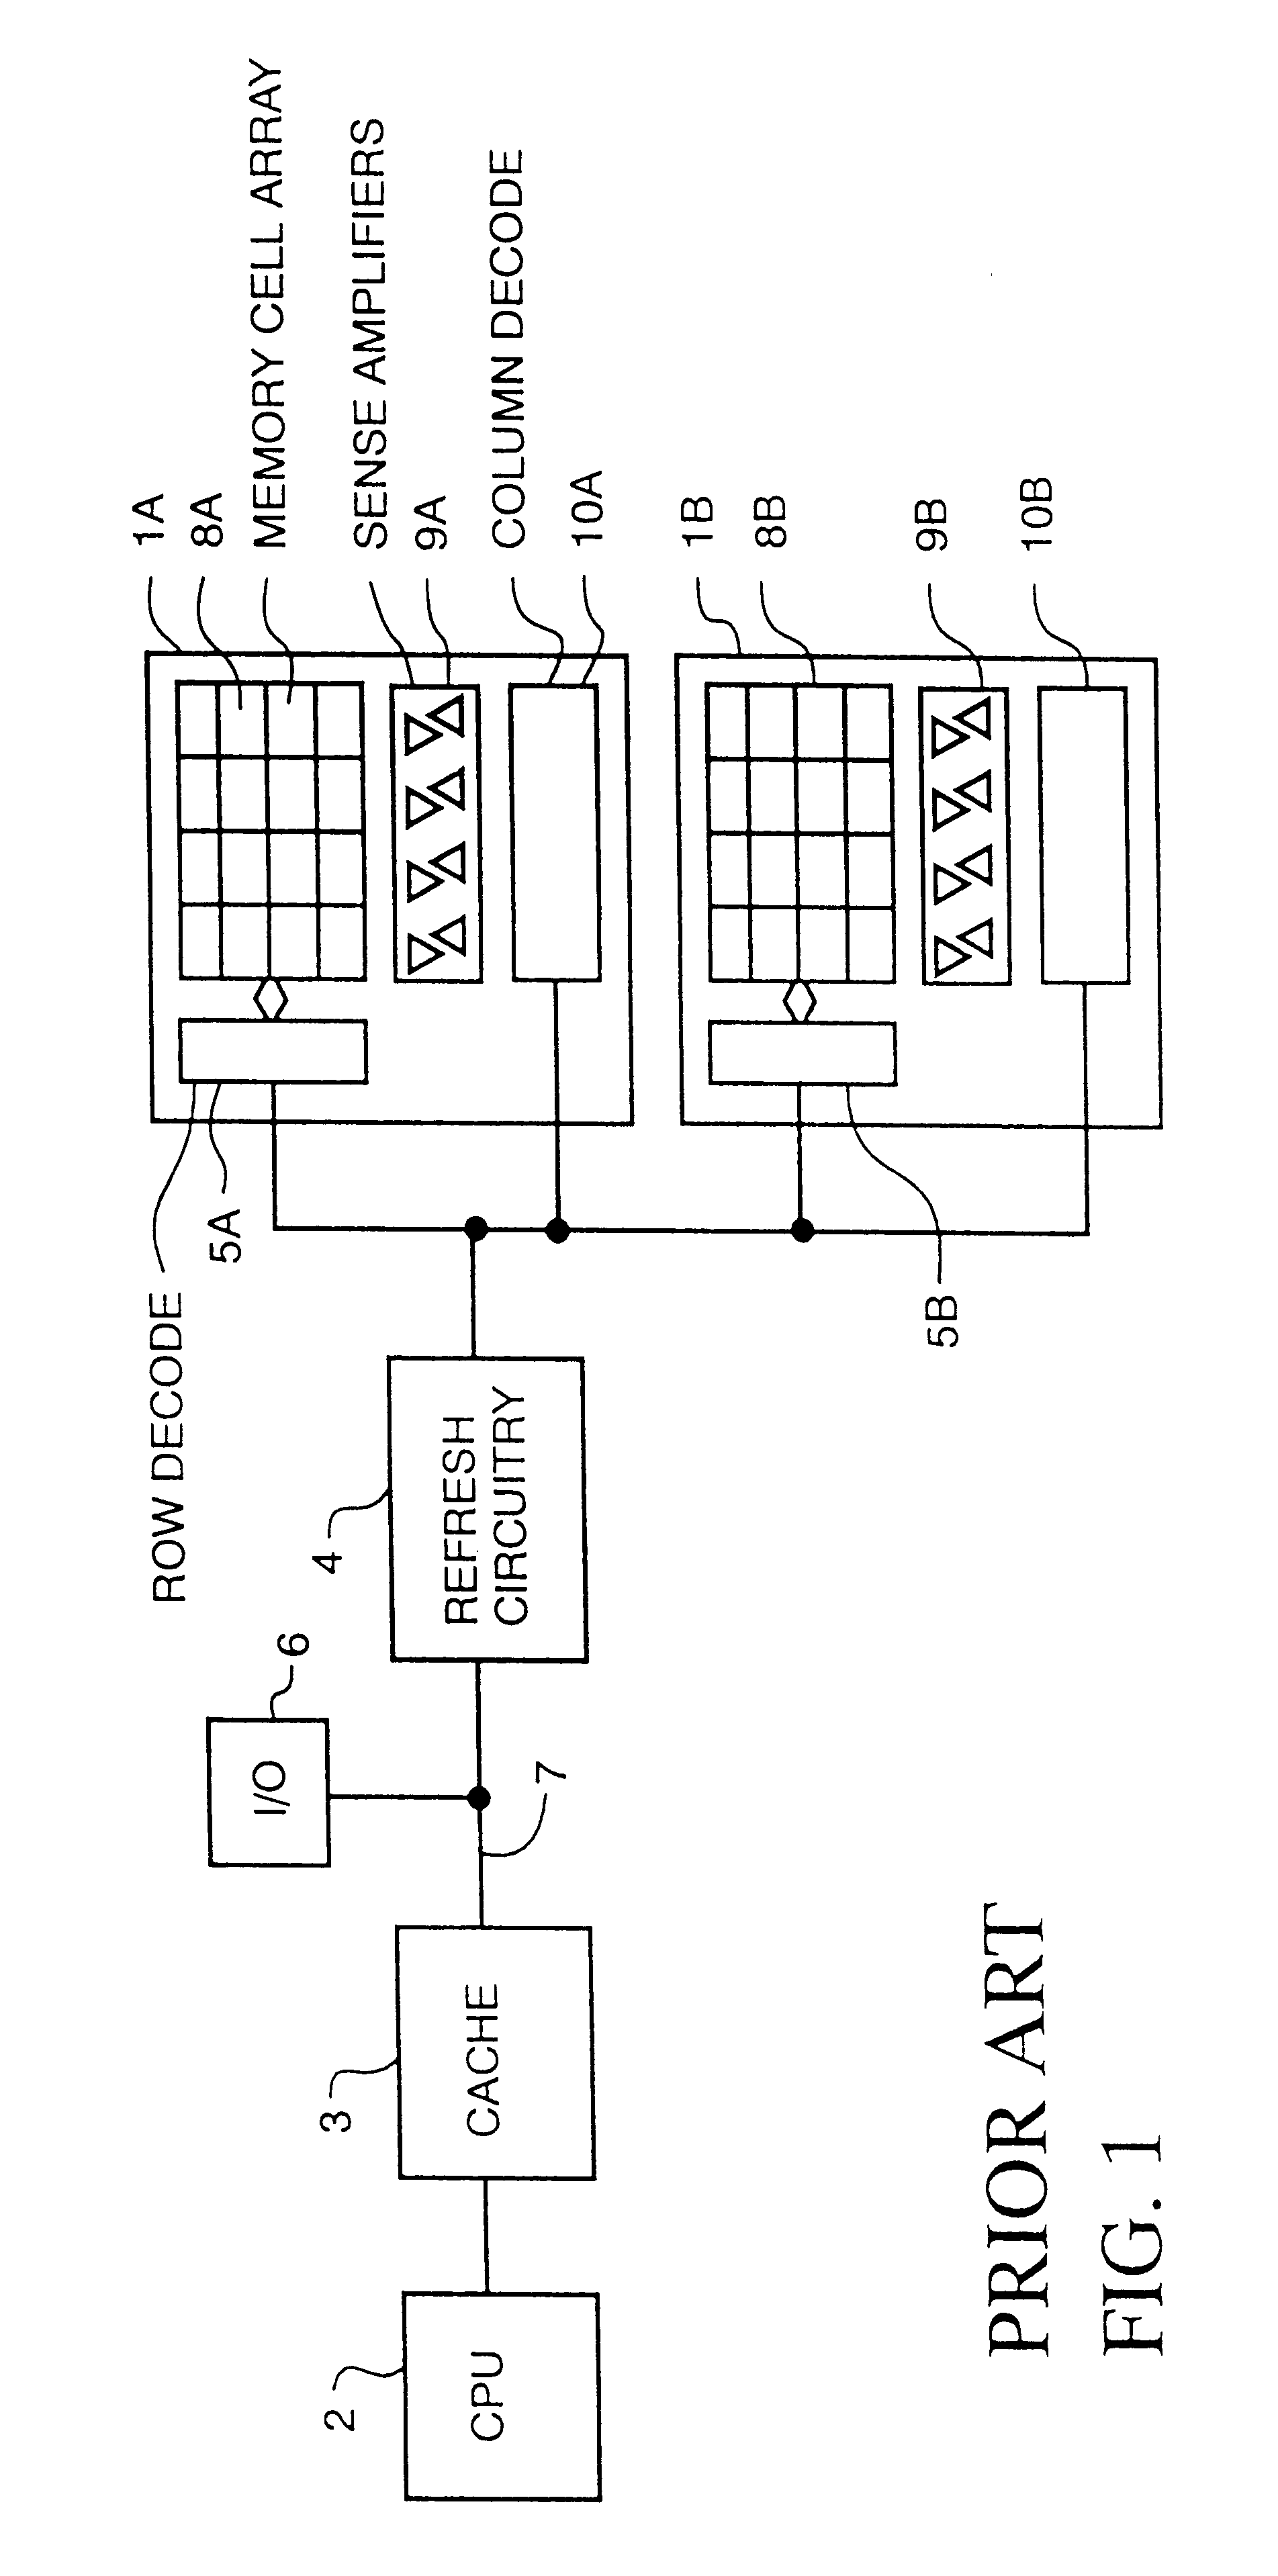 Memory device with multiple processors having parallel access to the same memory area